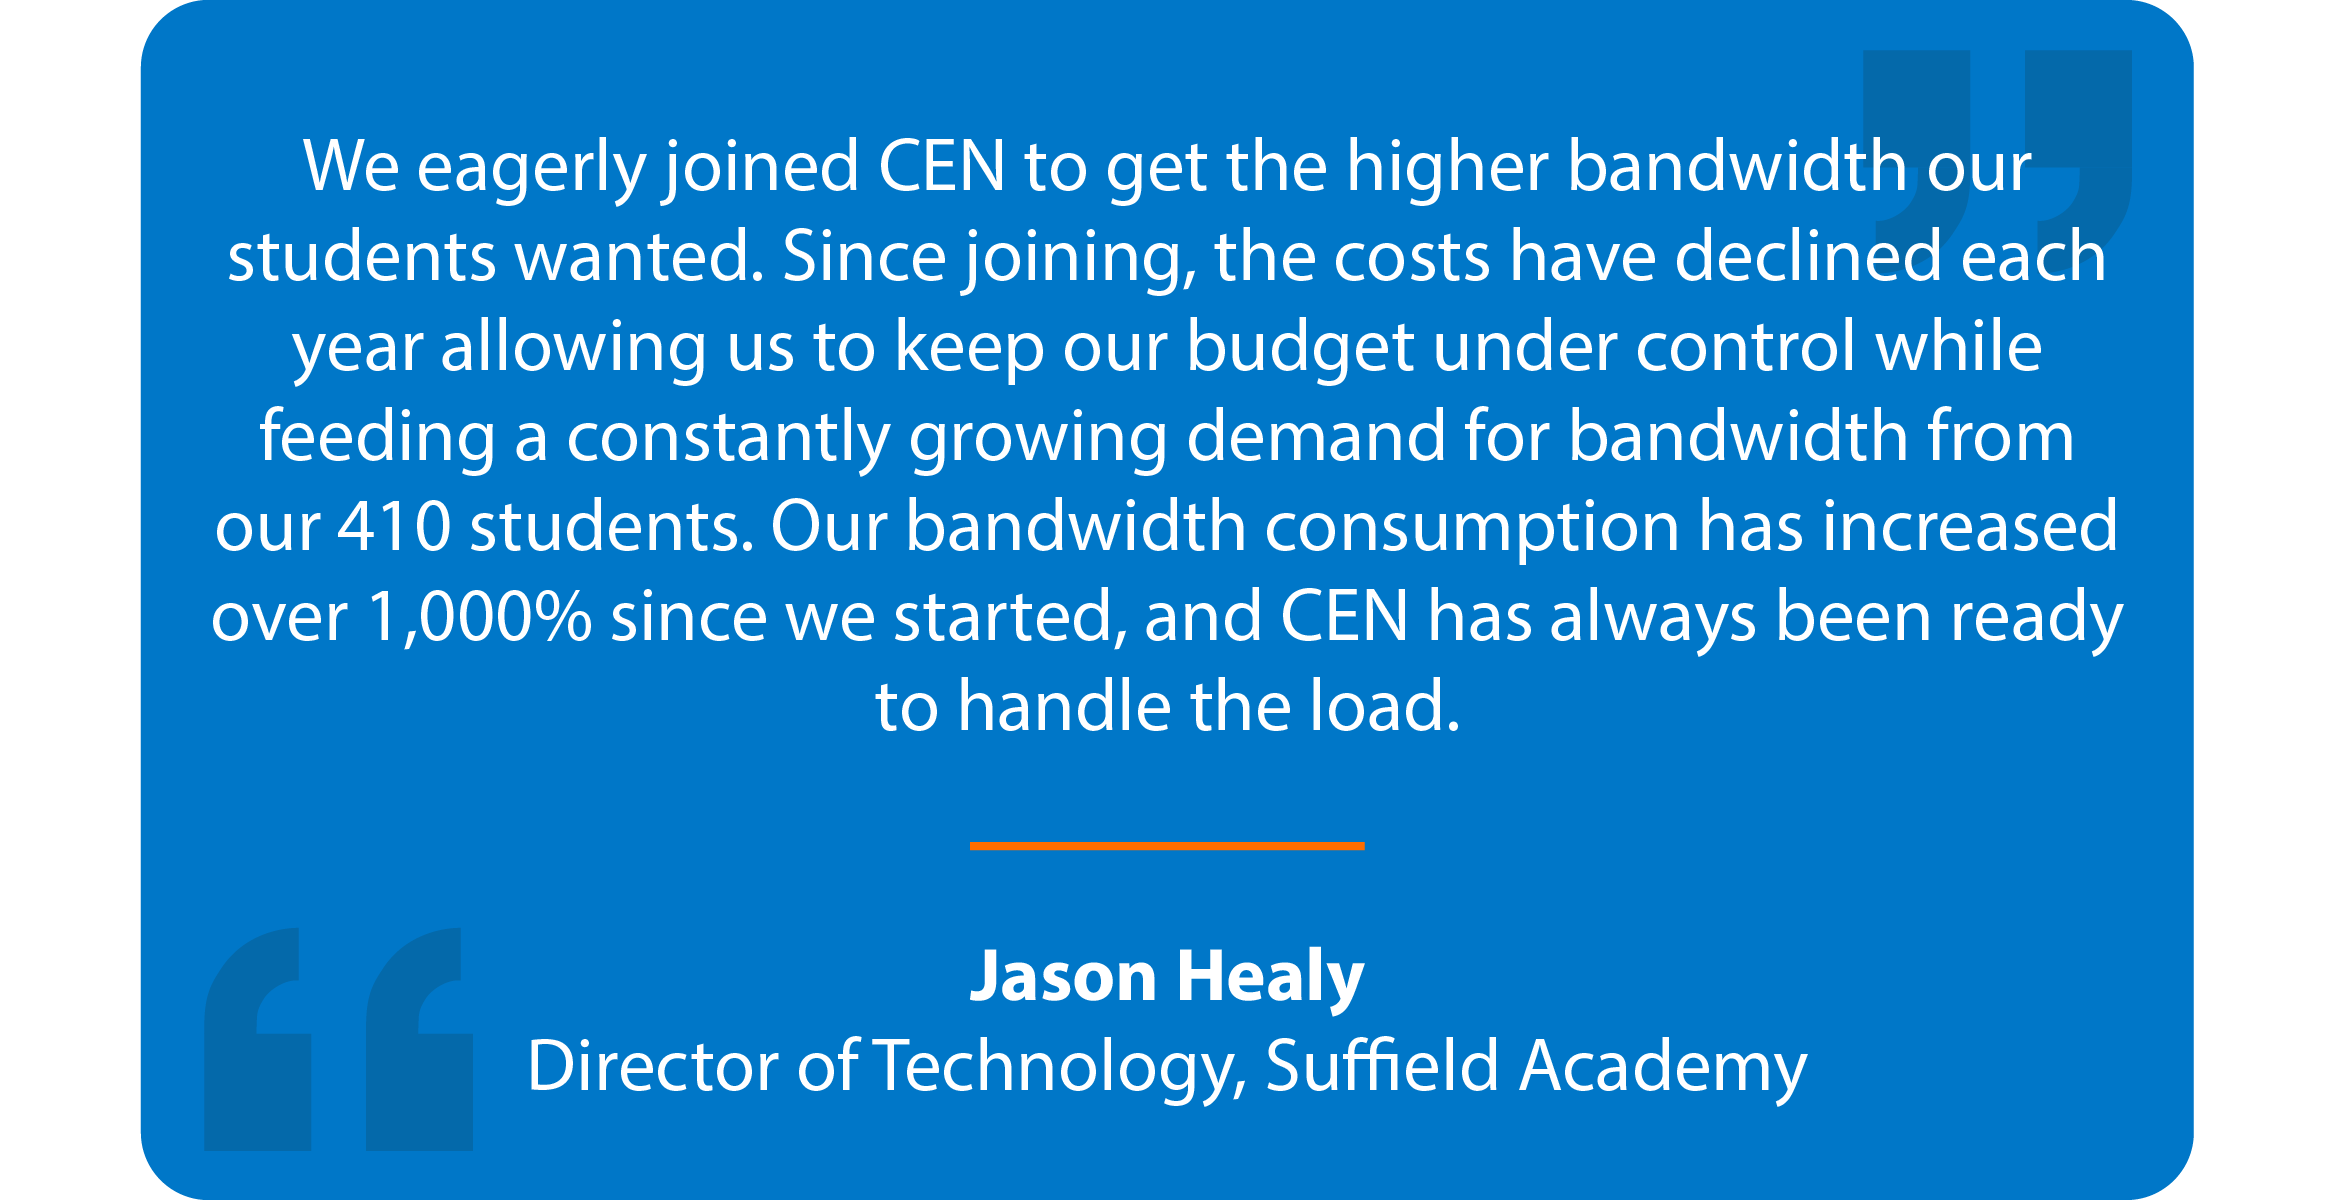 Blue box with quote that reads: We eagerly joined CEN to get the higher bandwidth our students wanted. Since joining, the costs have declined each year allowing us to keep our budget under control while feeding a constantly growing demand for bandwidth from our 410 students. Our bandwidth consumption has increased over 1,000% since we started, and CEN has always been ready to handle the load. Jason Healy Director of Technology, Suffield Academy